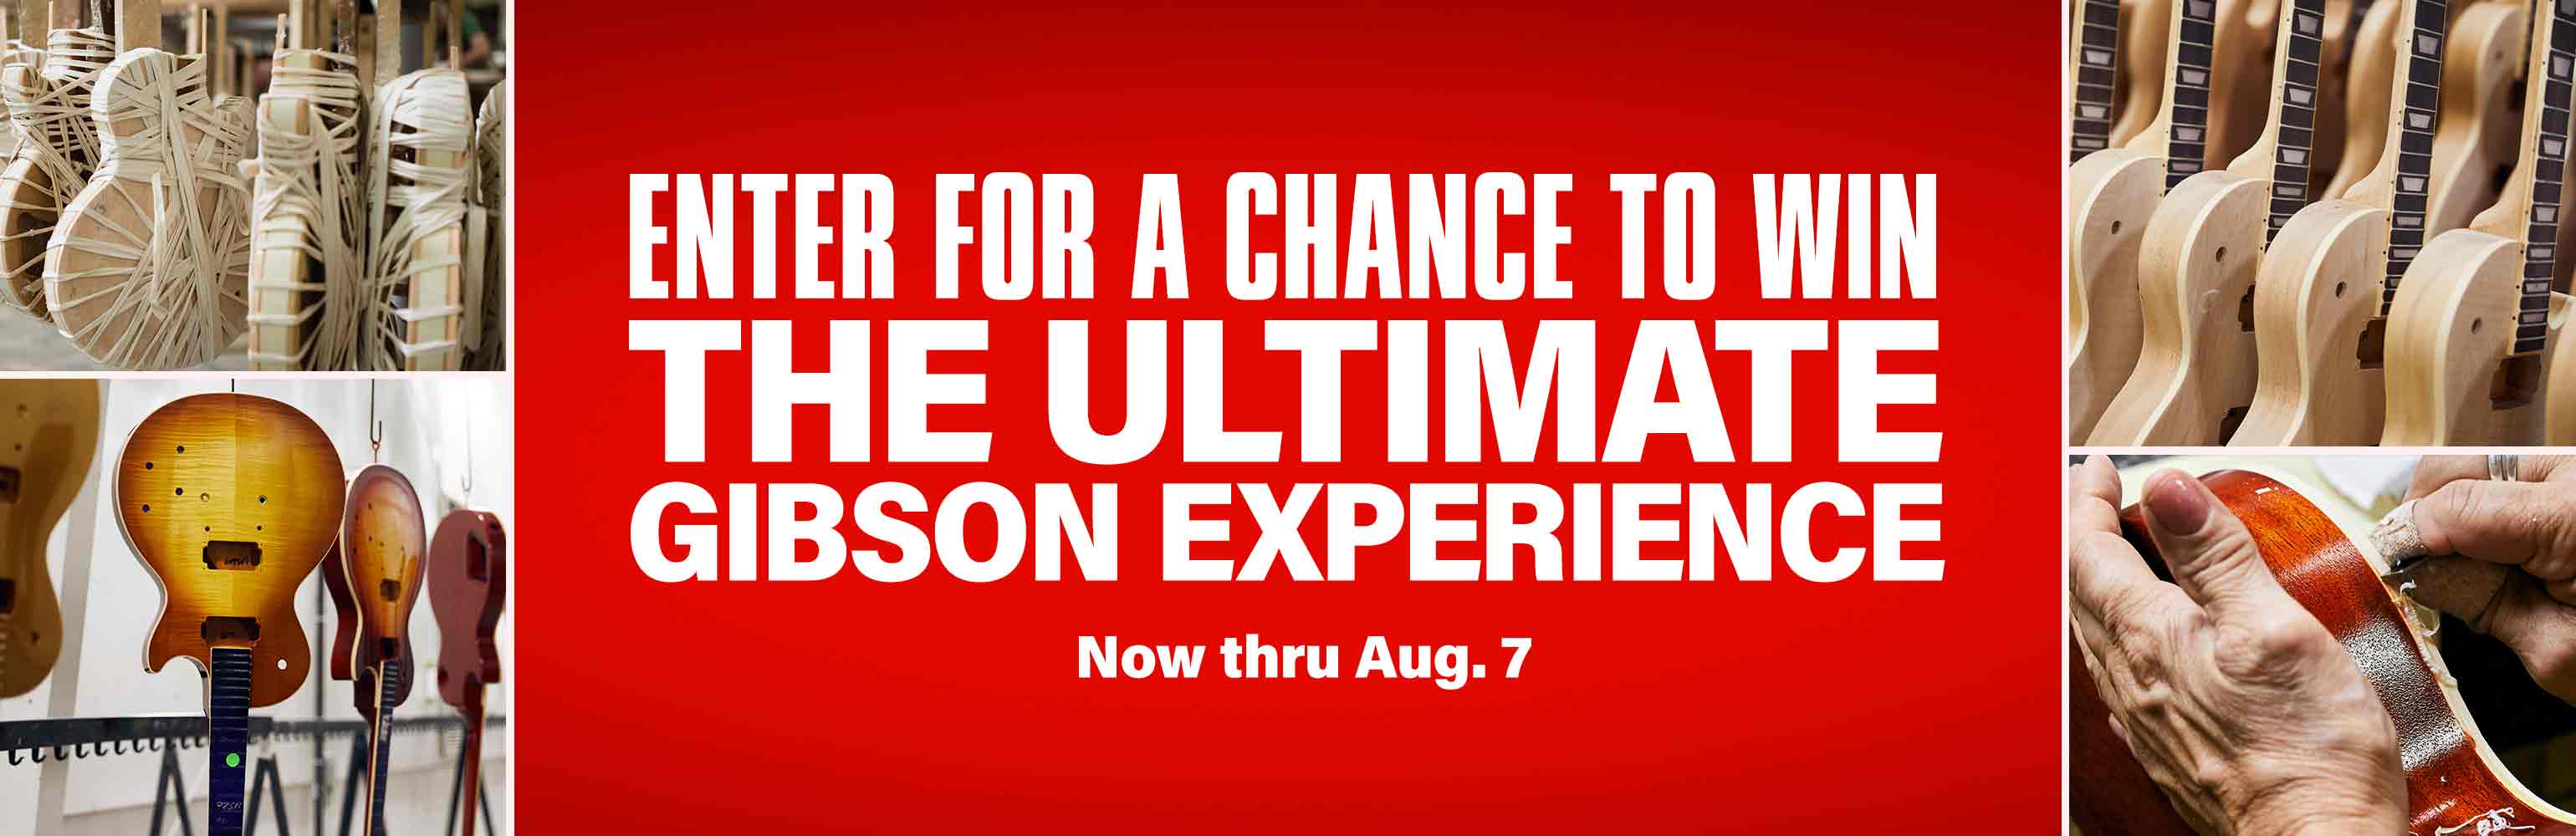 Enter for a chance to win the ultimate Gibson experience. Now thru August 7.